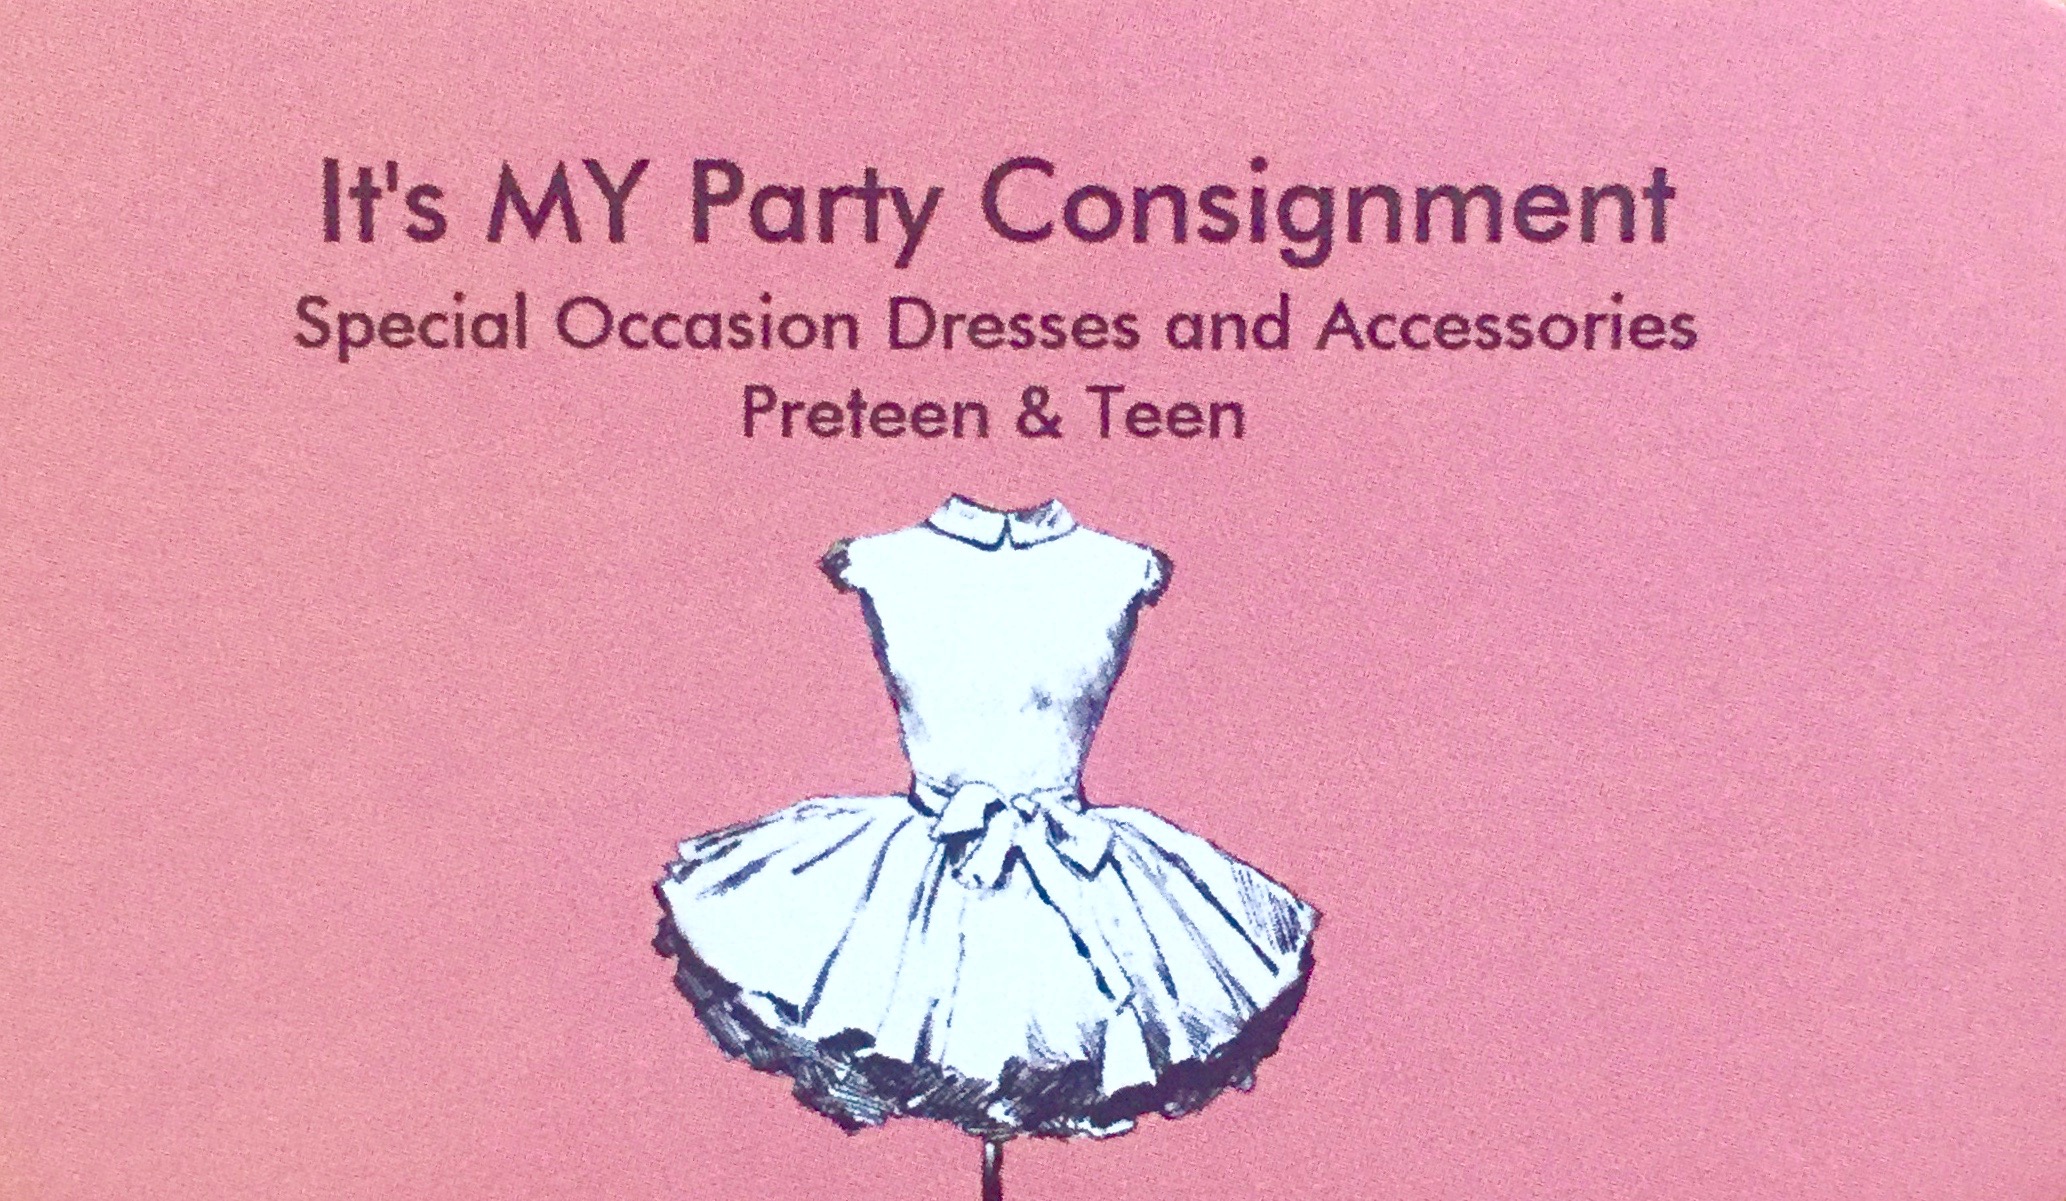 It's MY Party Consignment | Pop Color Events | Adding a Pop of Color to Bar & Bat Mitzvahs in DC, MD & VA